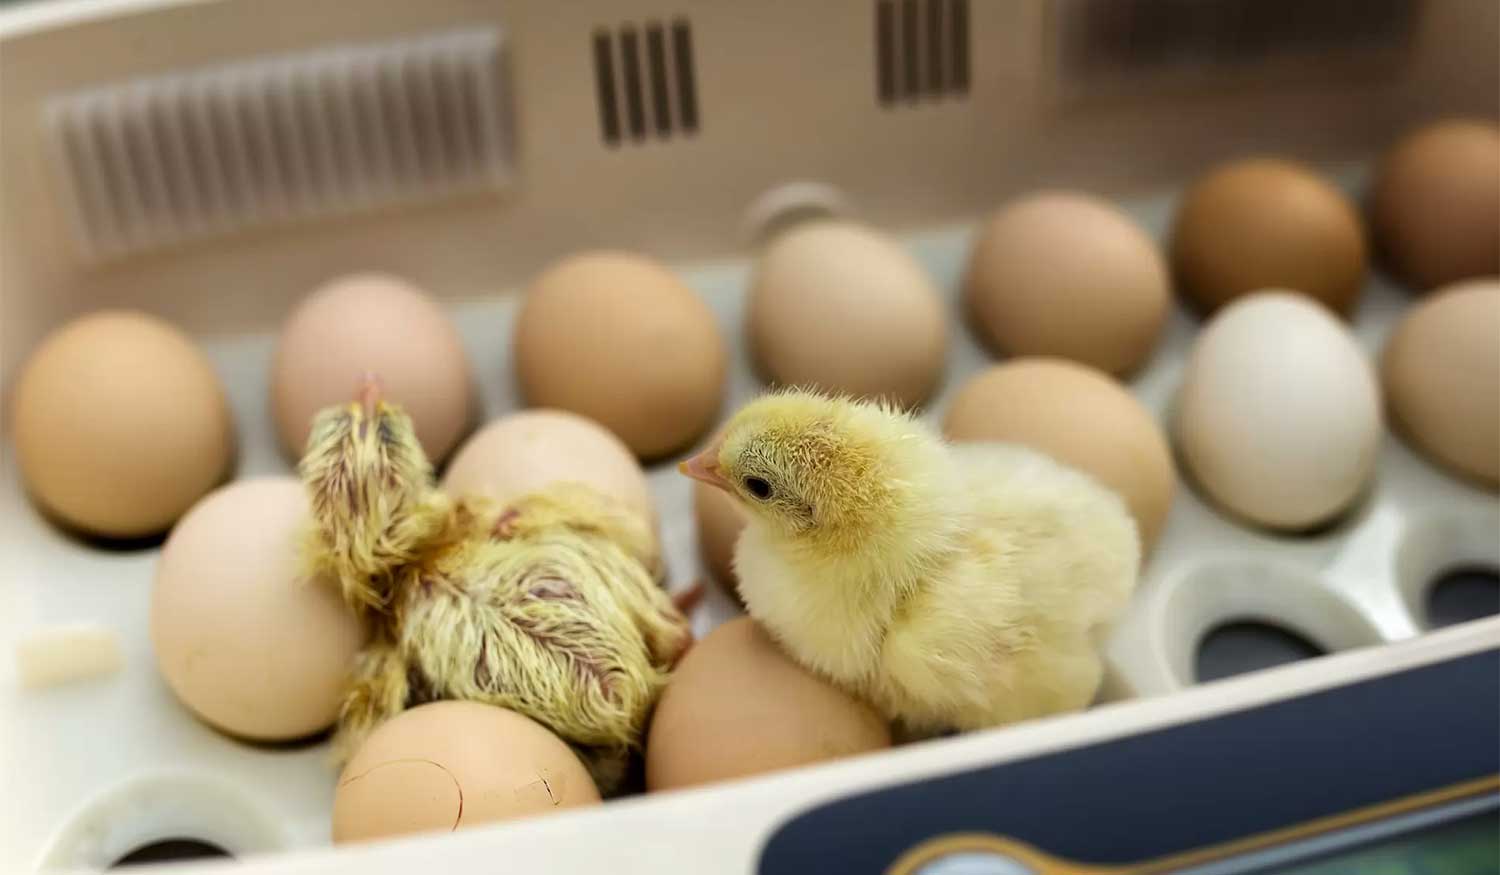 Hatching chickens in an incubator. The beauty of new life is one of the wonderful reminders of how big and creative God is.